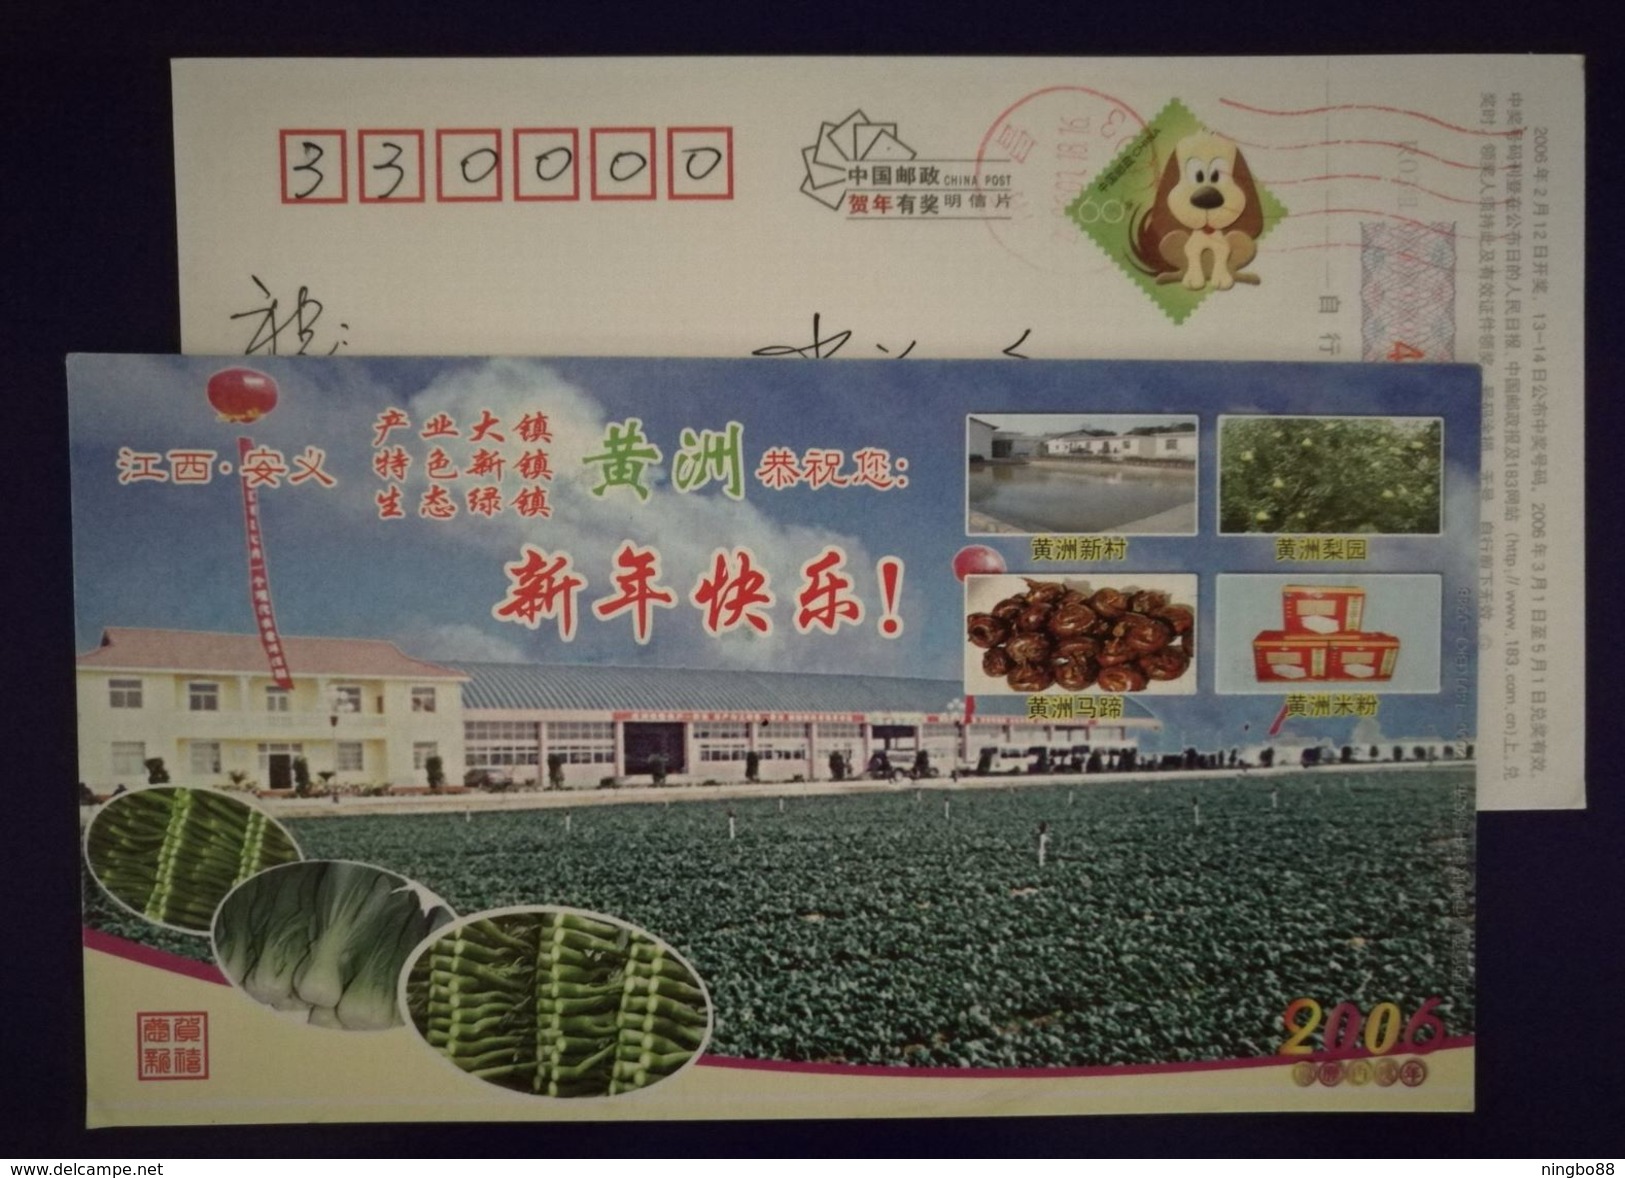 Vegetable Chinese Cabbage,Chinese Flowering Cabbage,water Chestnut,CN 06 Huangzhou Town Special Planting Industry PSC - Vegetables